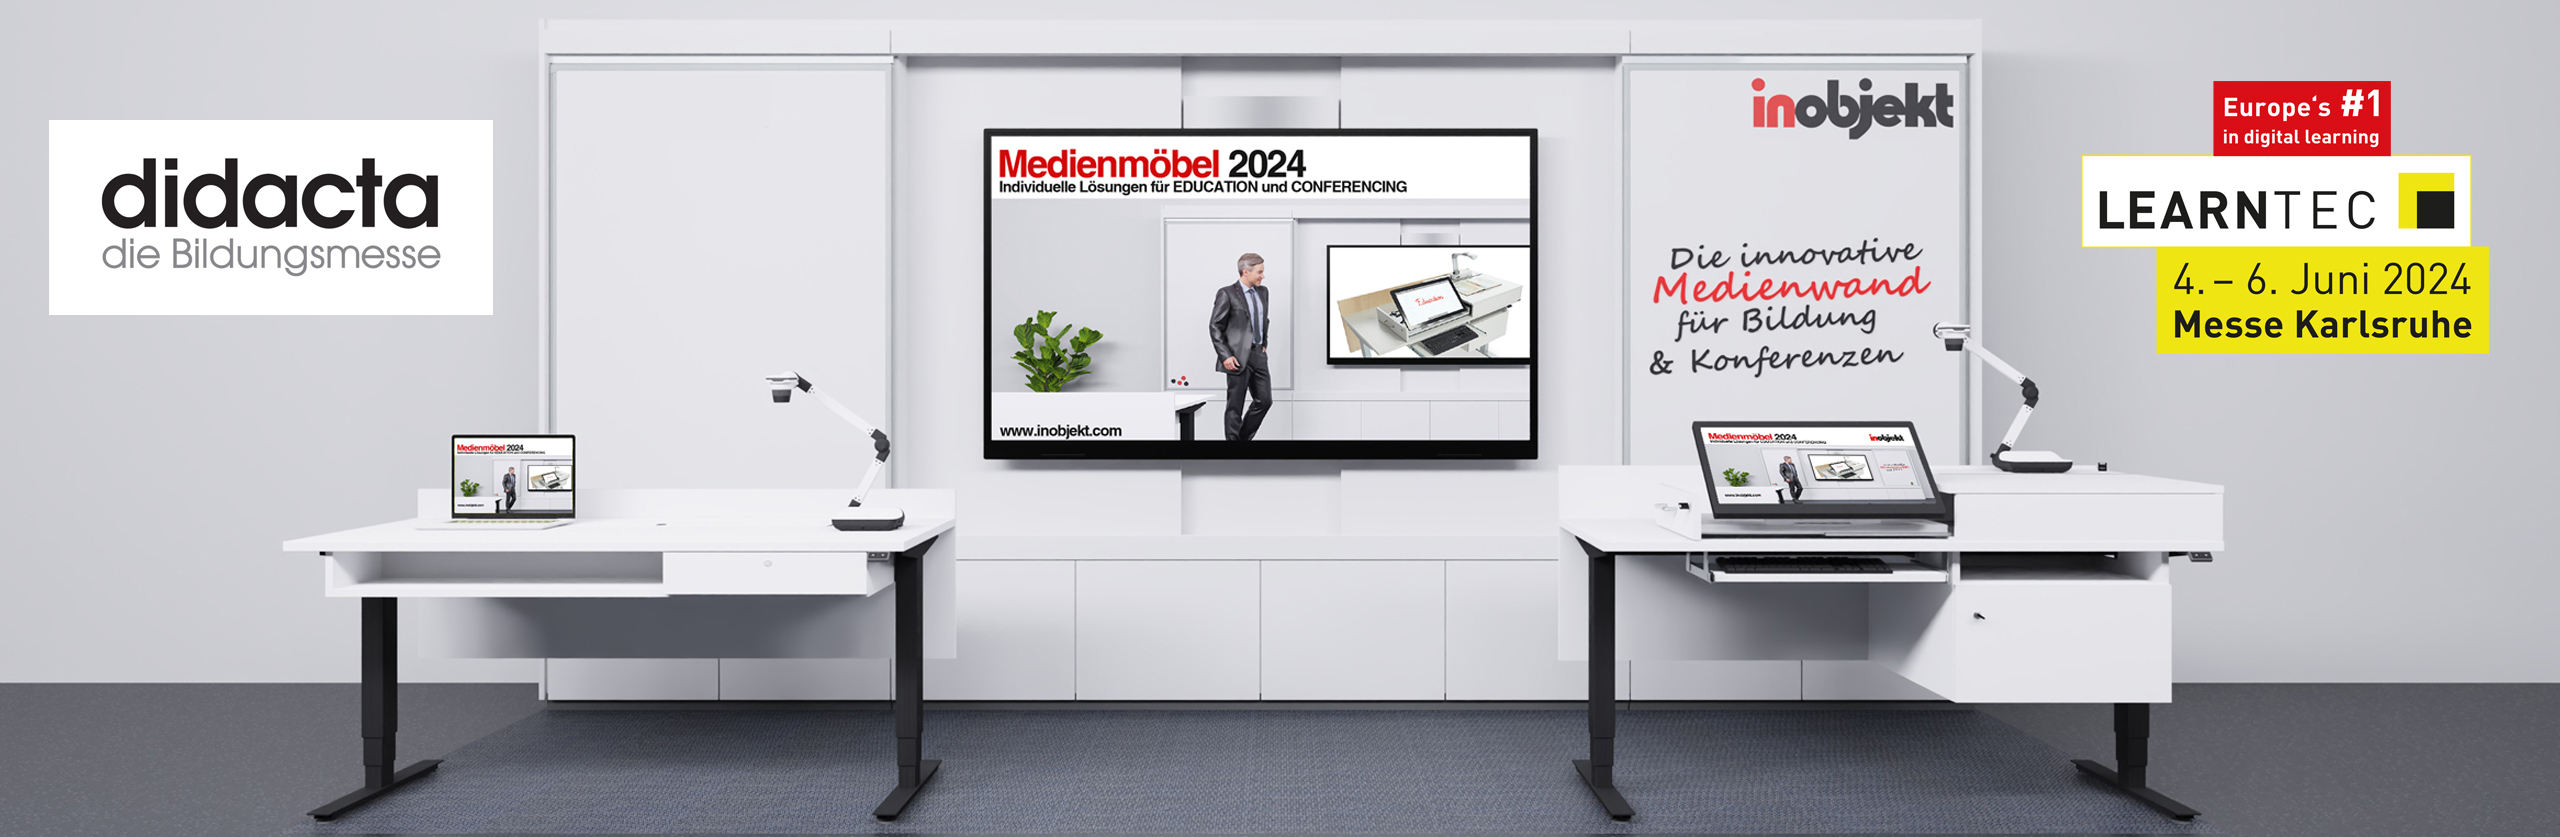 Note Didacta Cologne (20 - 24.02.24), Learntec Karlsruhe (04 - 06.06.24). Exhibition stand with media wall ino.wall and media tables ino.desk + ino.vation.